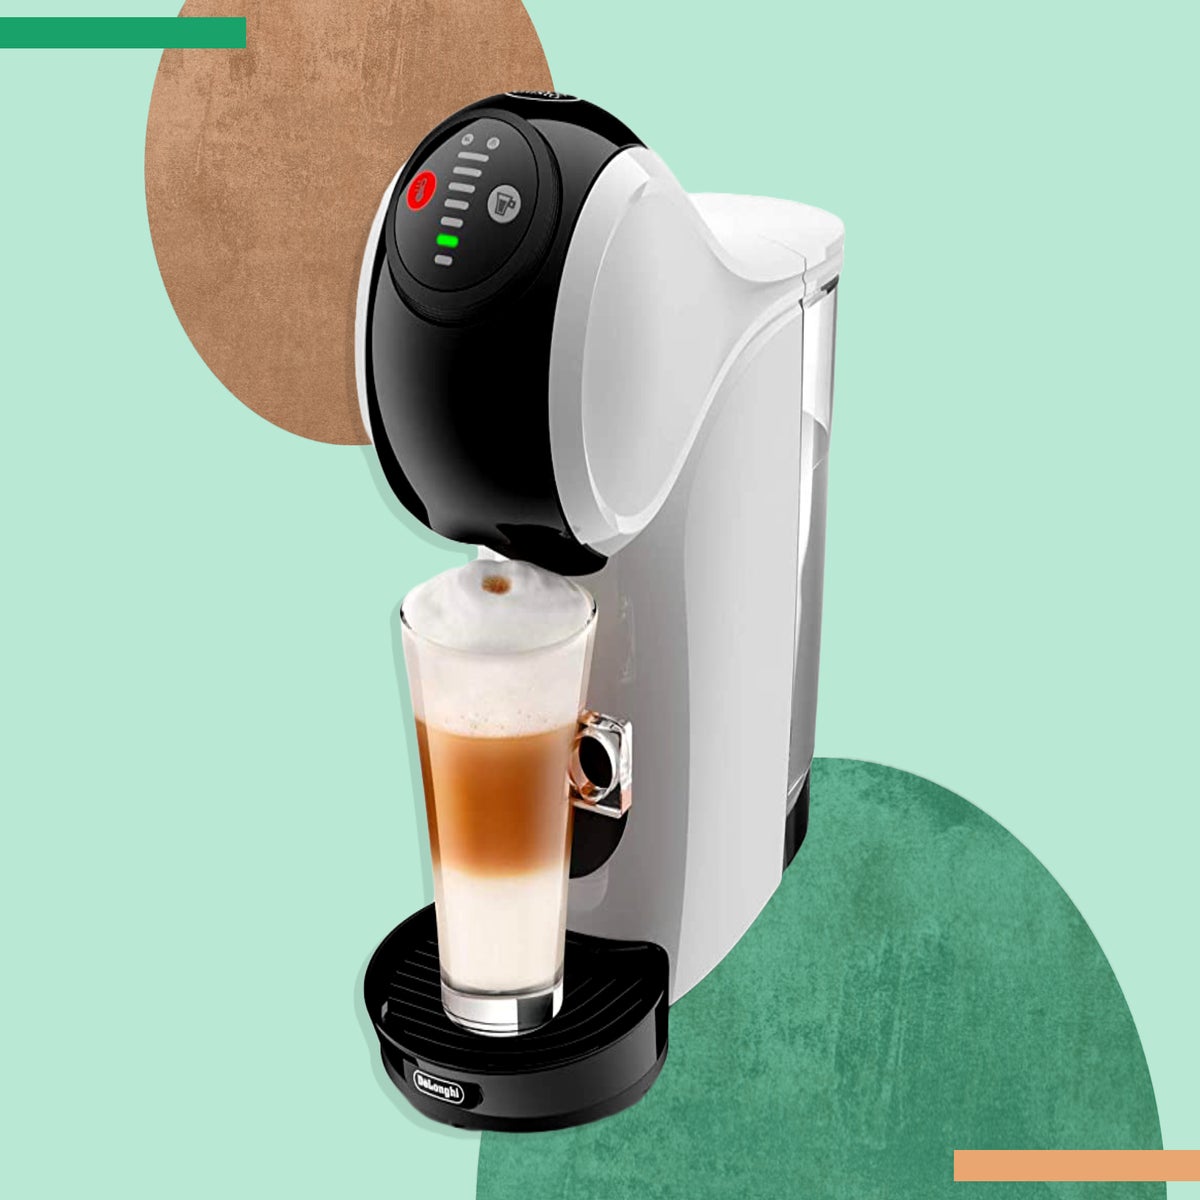 Something you need to know before making Dolce Gusto